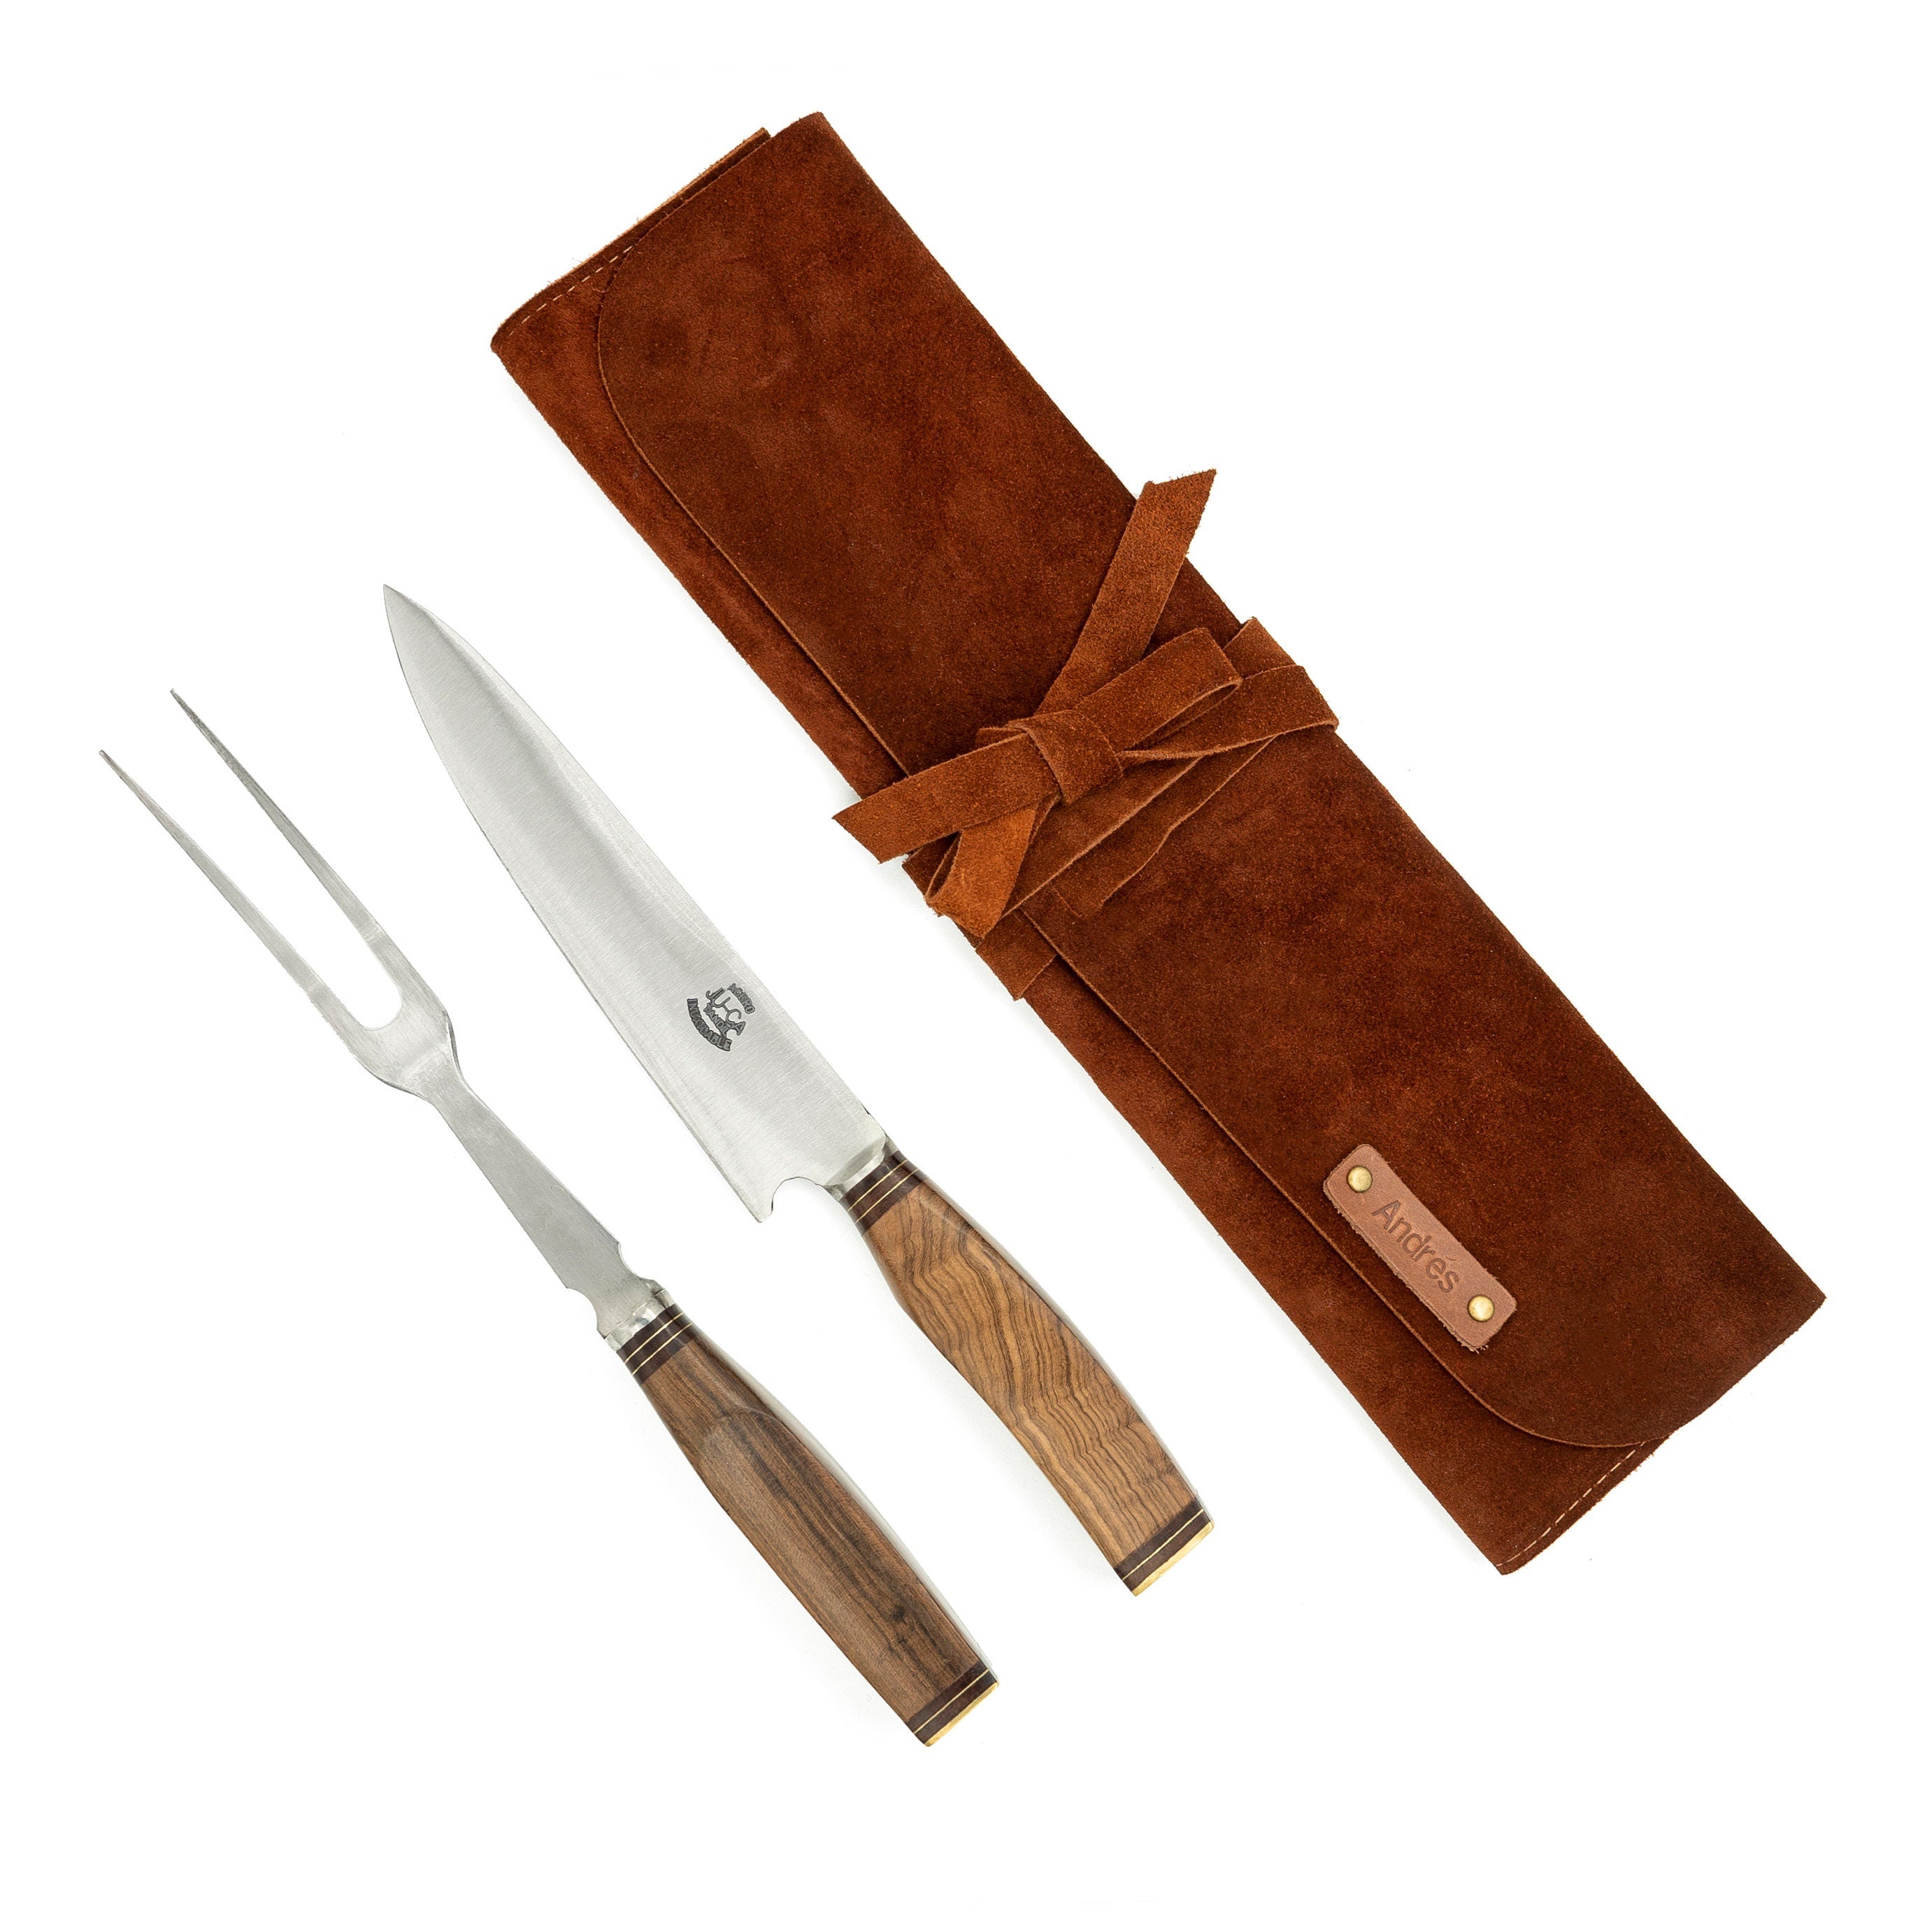 Gaucholife Gaucho Knife and Fork Carving Set,